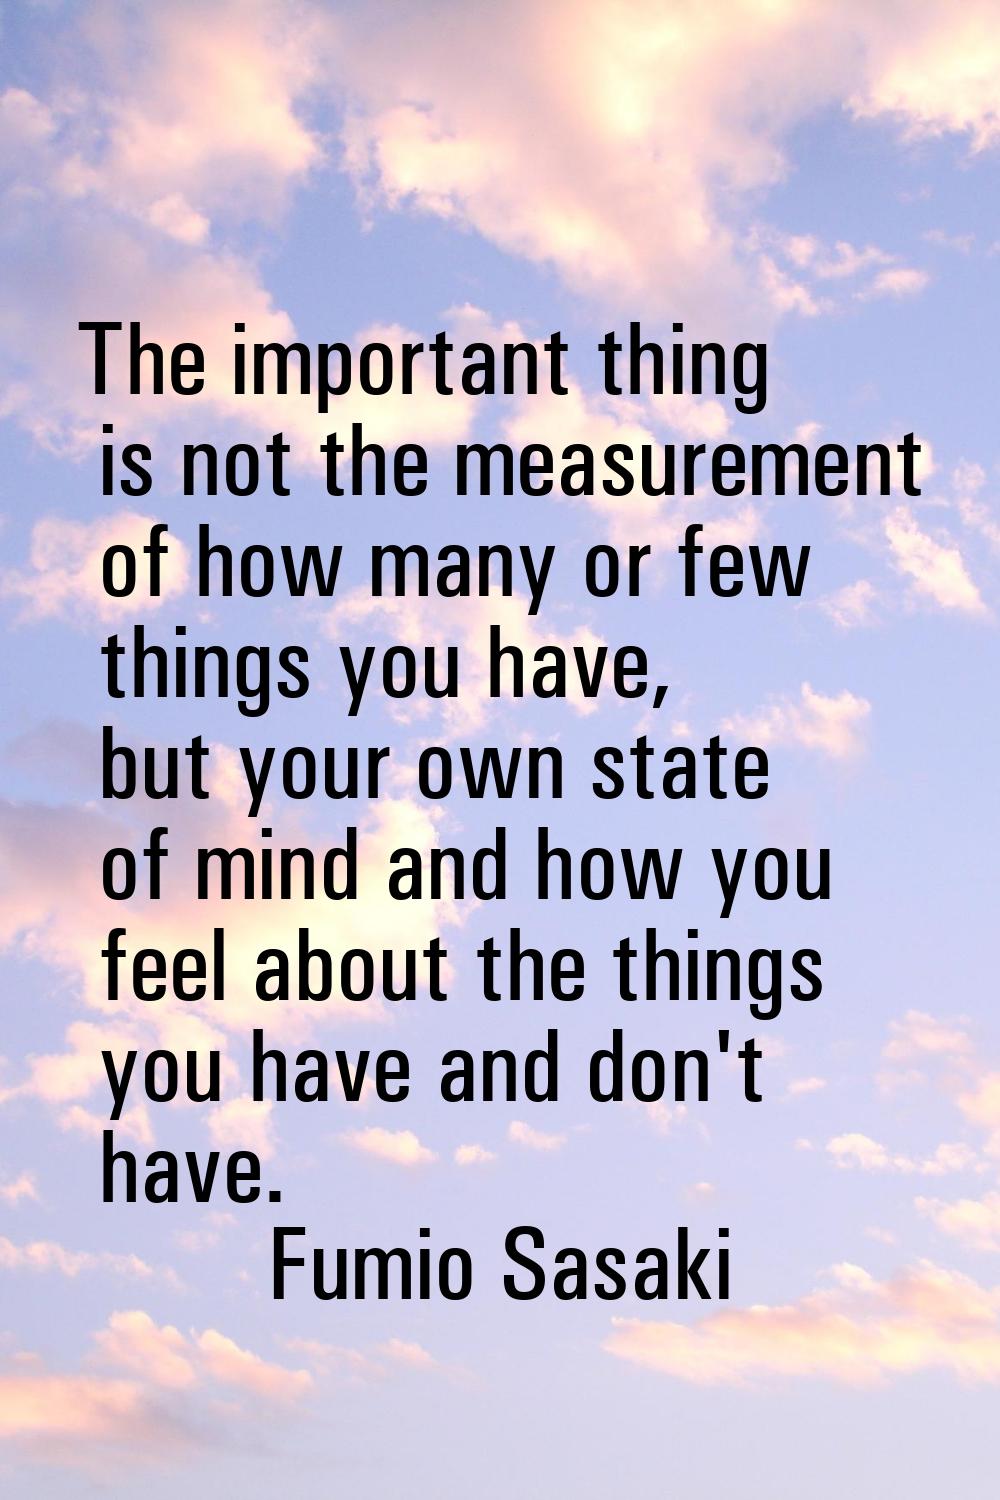 The important thing is not the measurement of how many or few things you have, but your own state o